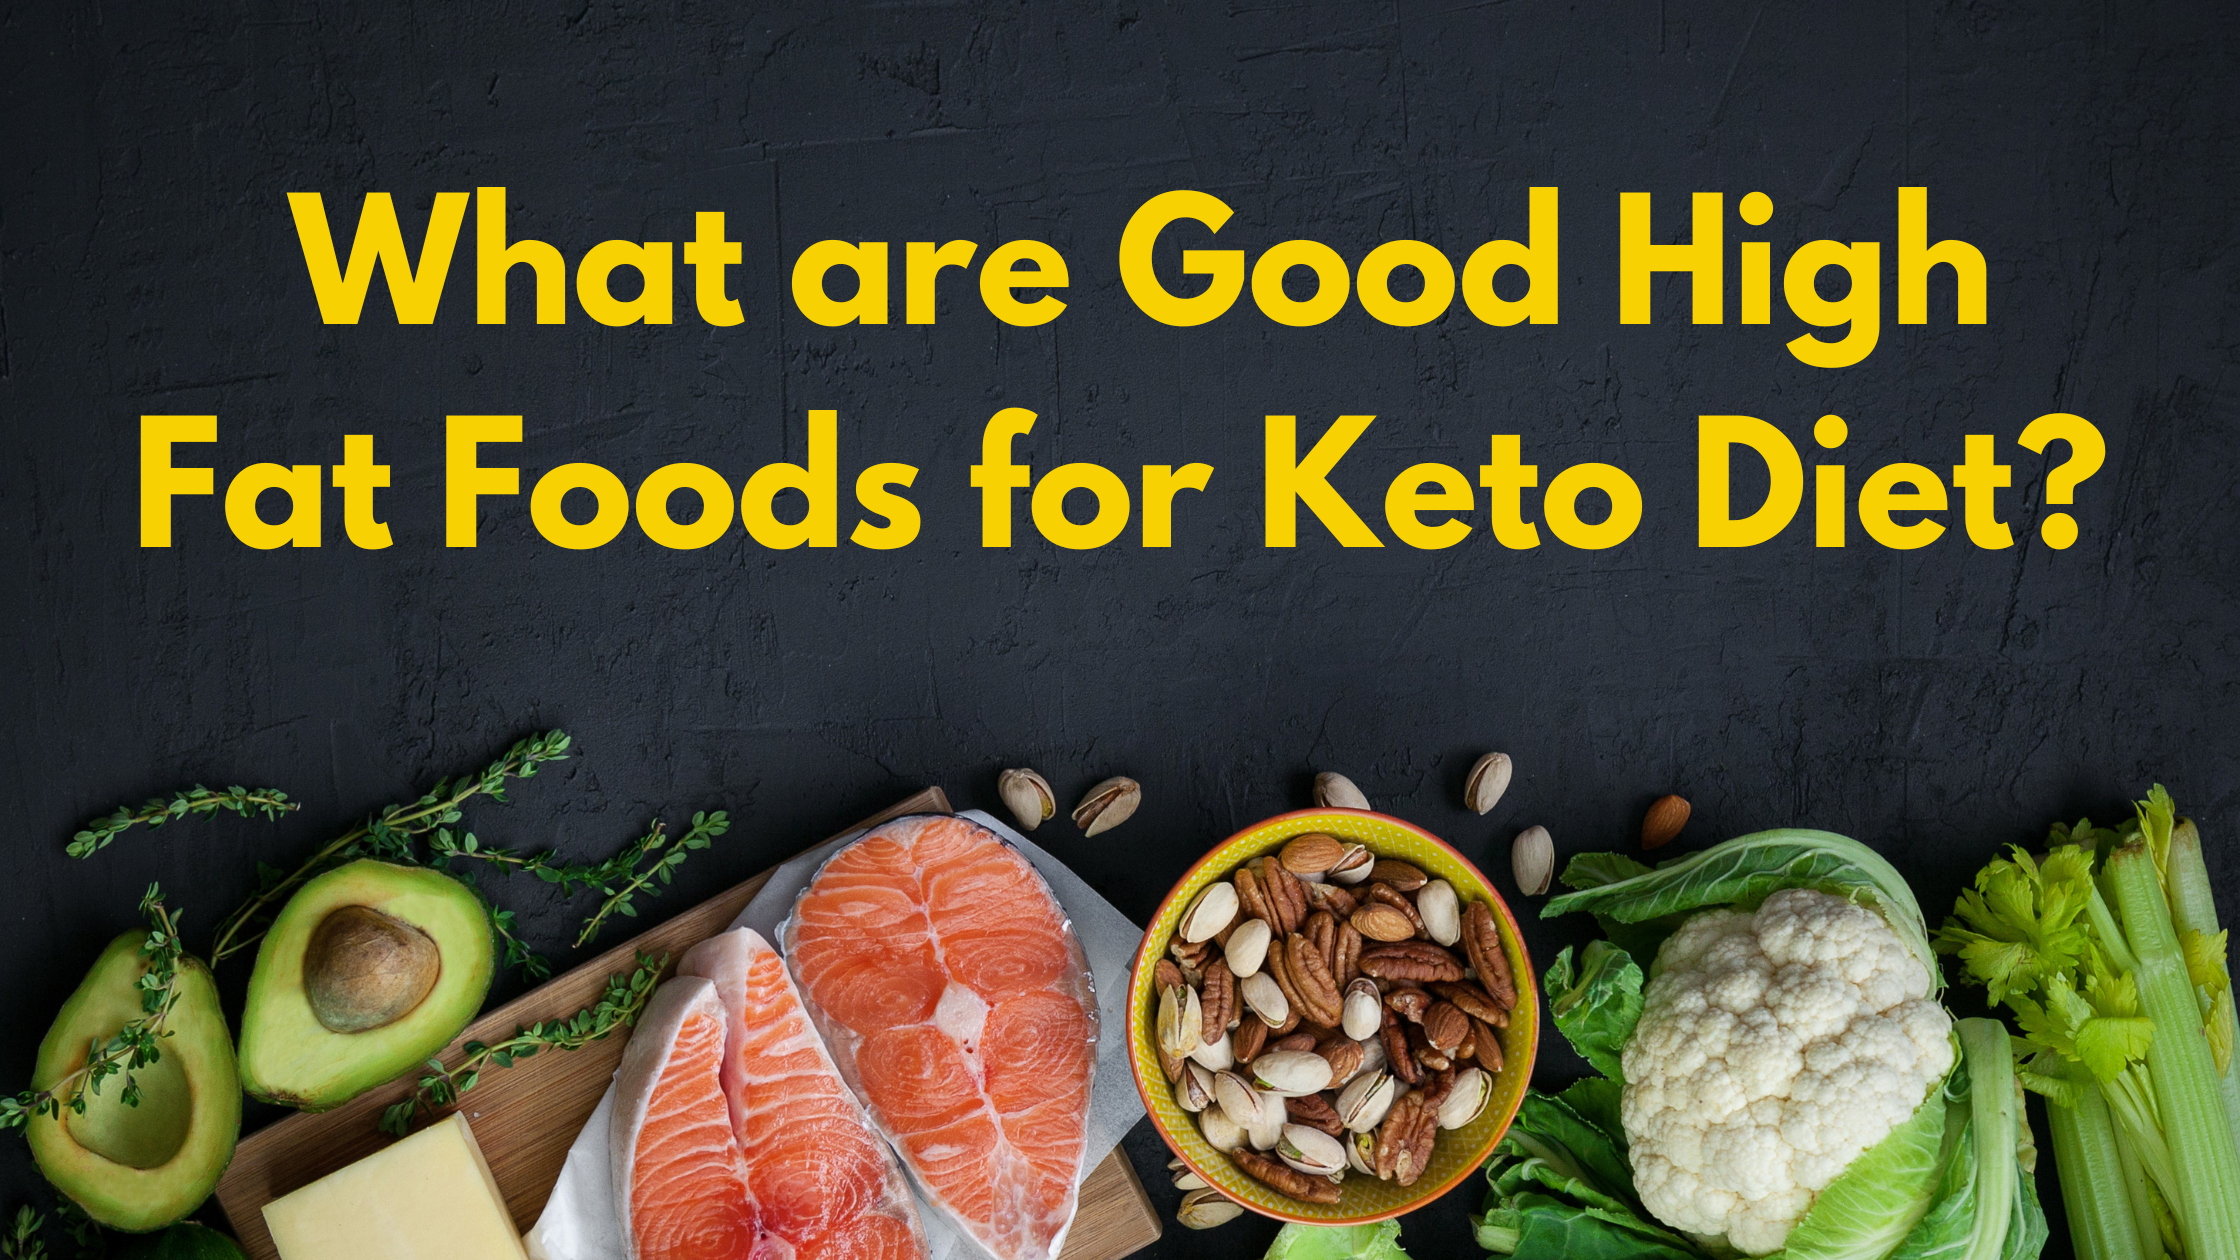 High Fat Food for keto